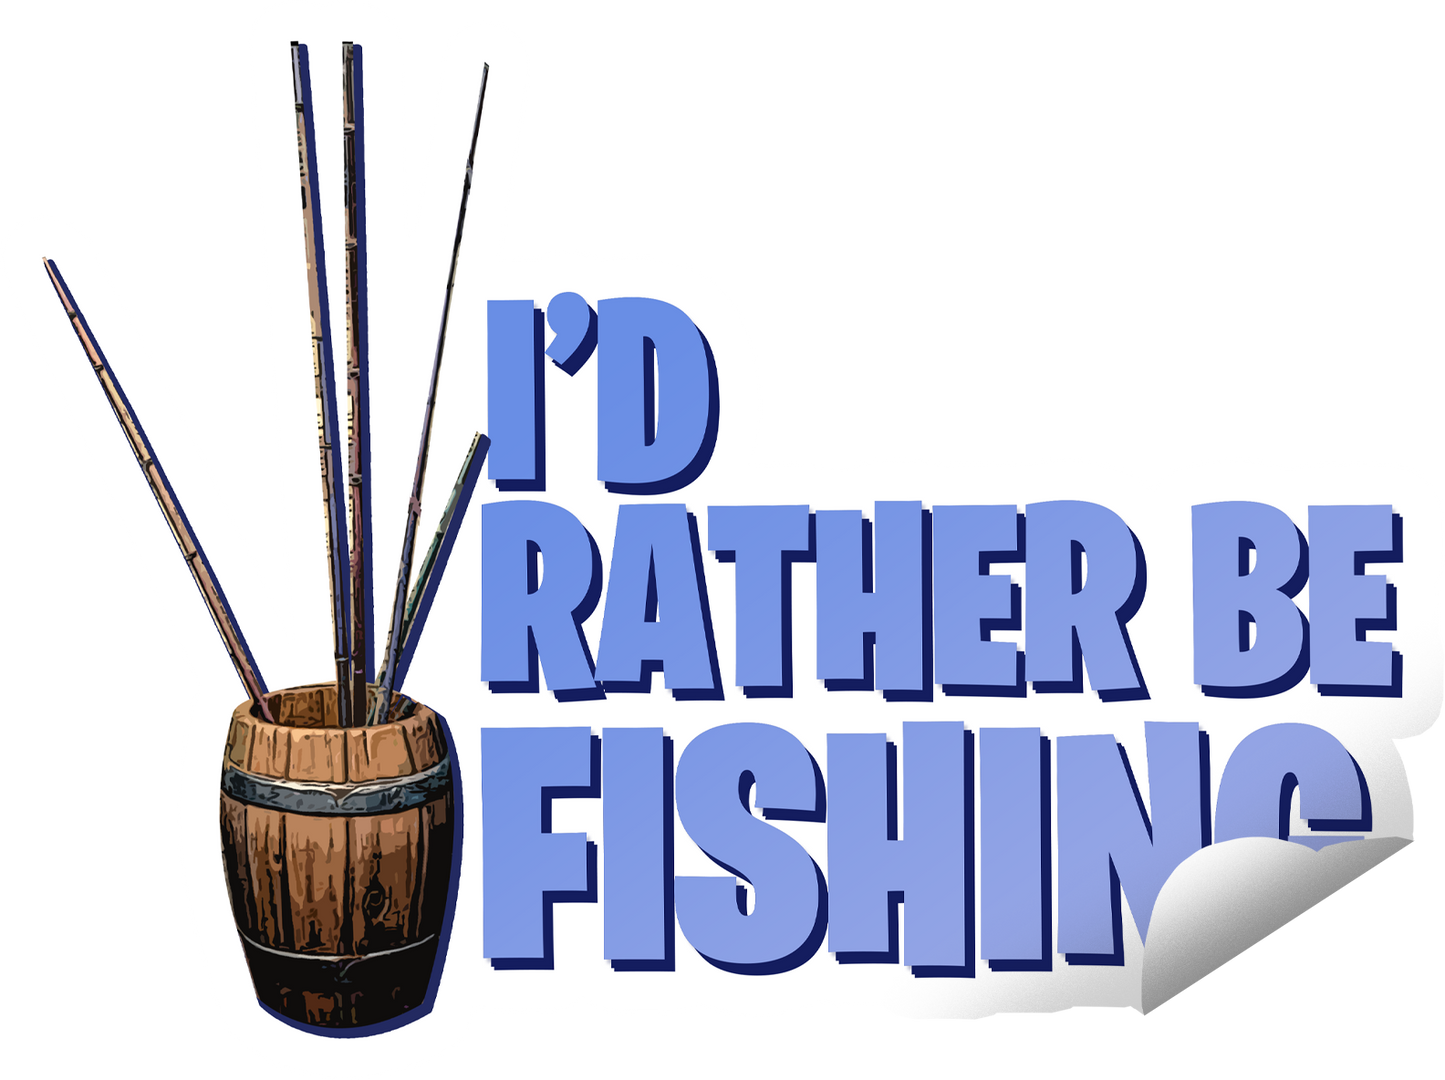 I'd Rather Be Fishing Sticker